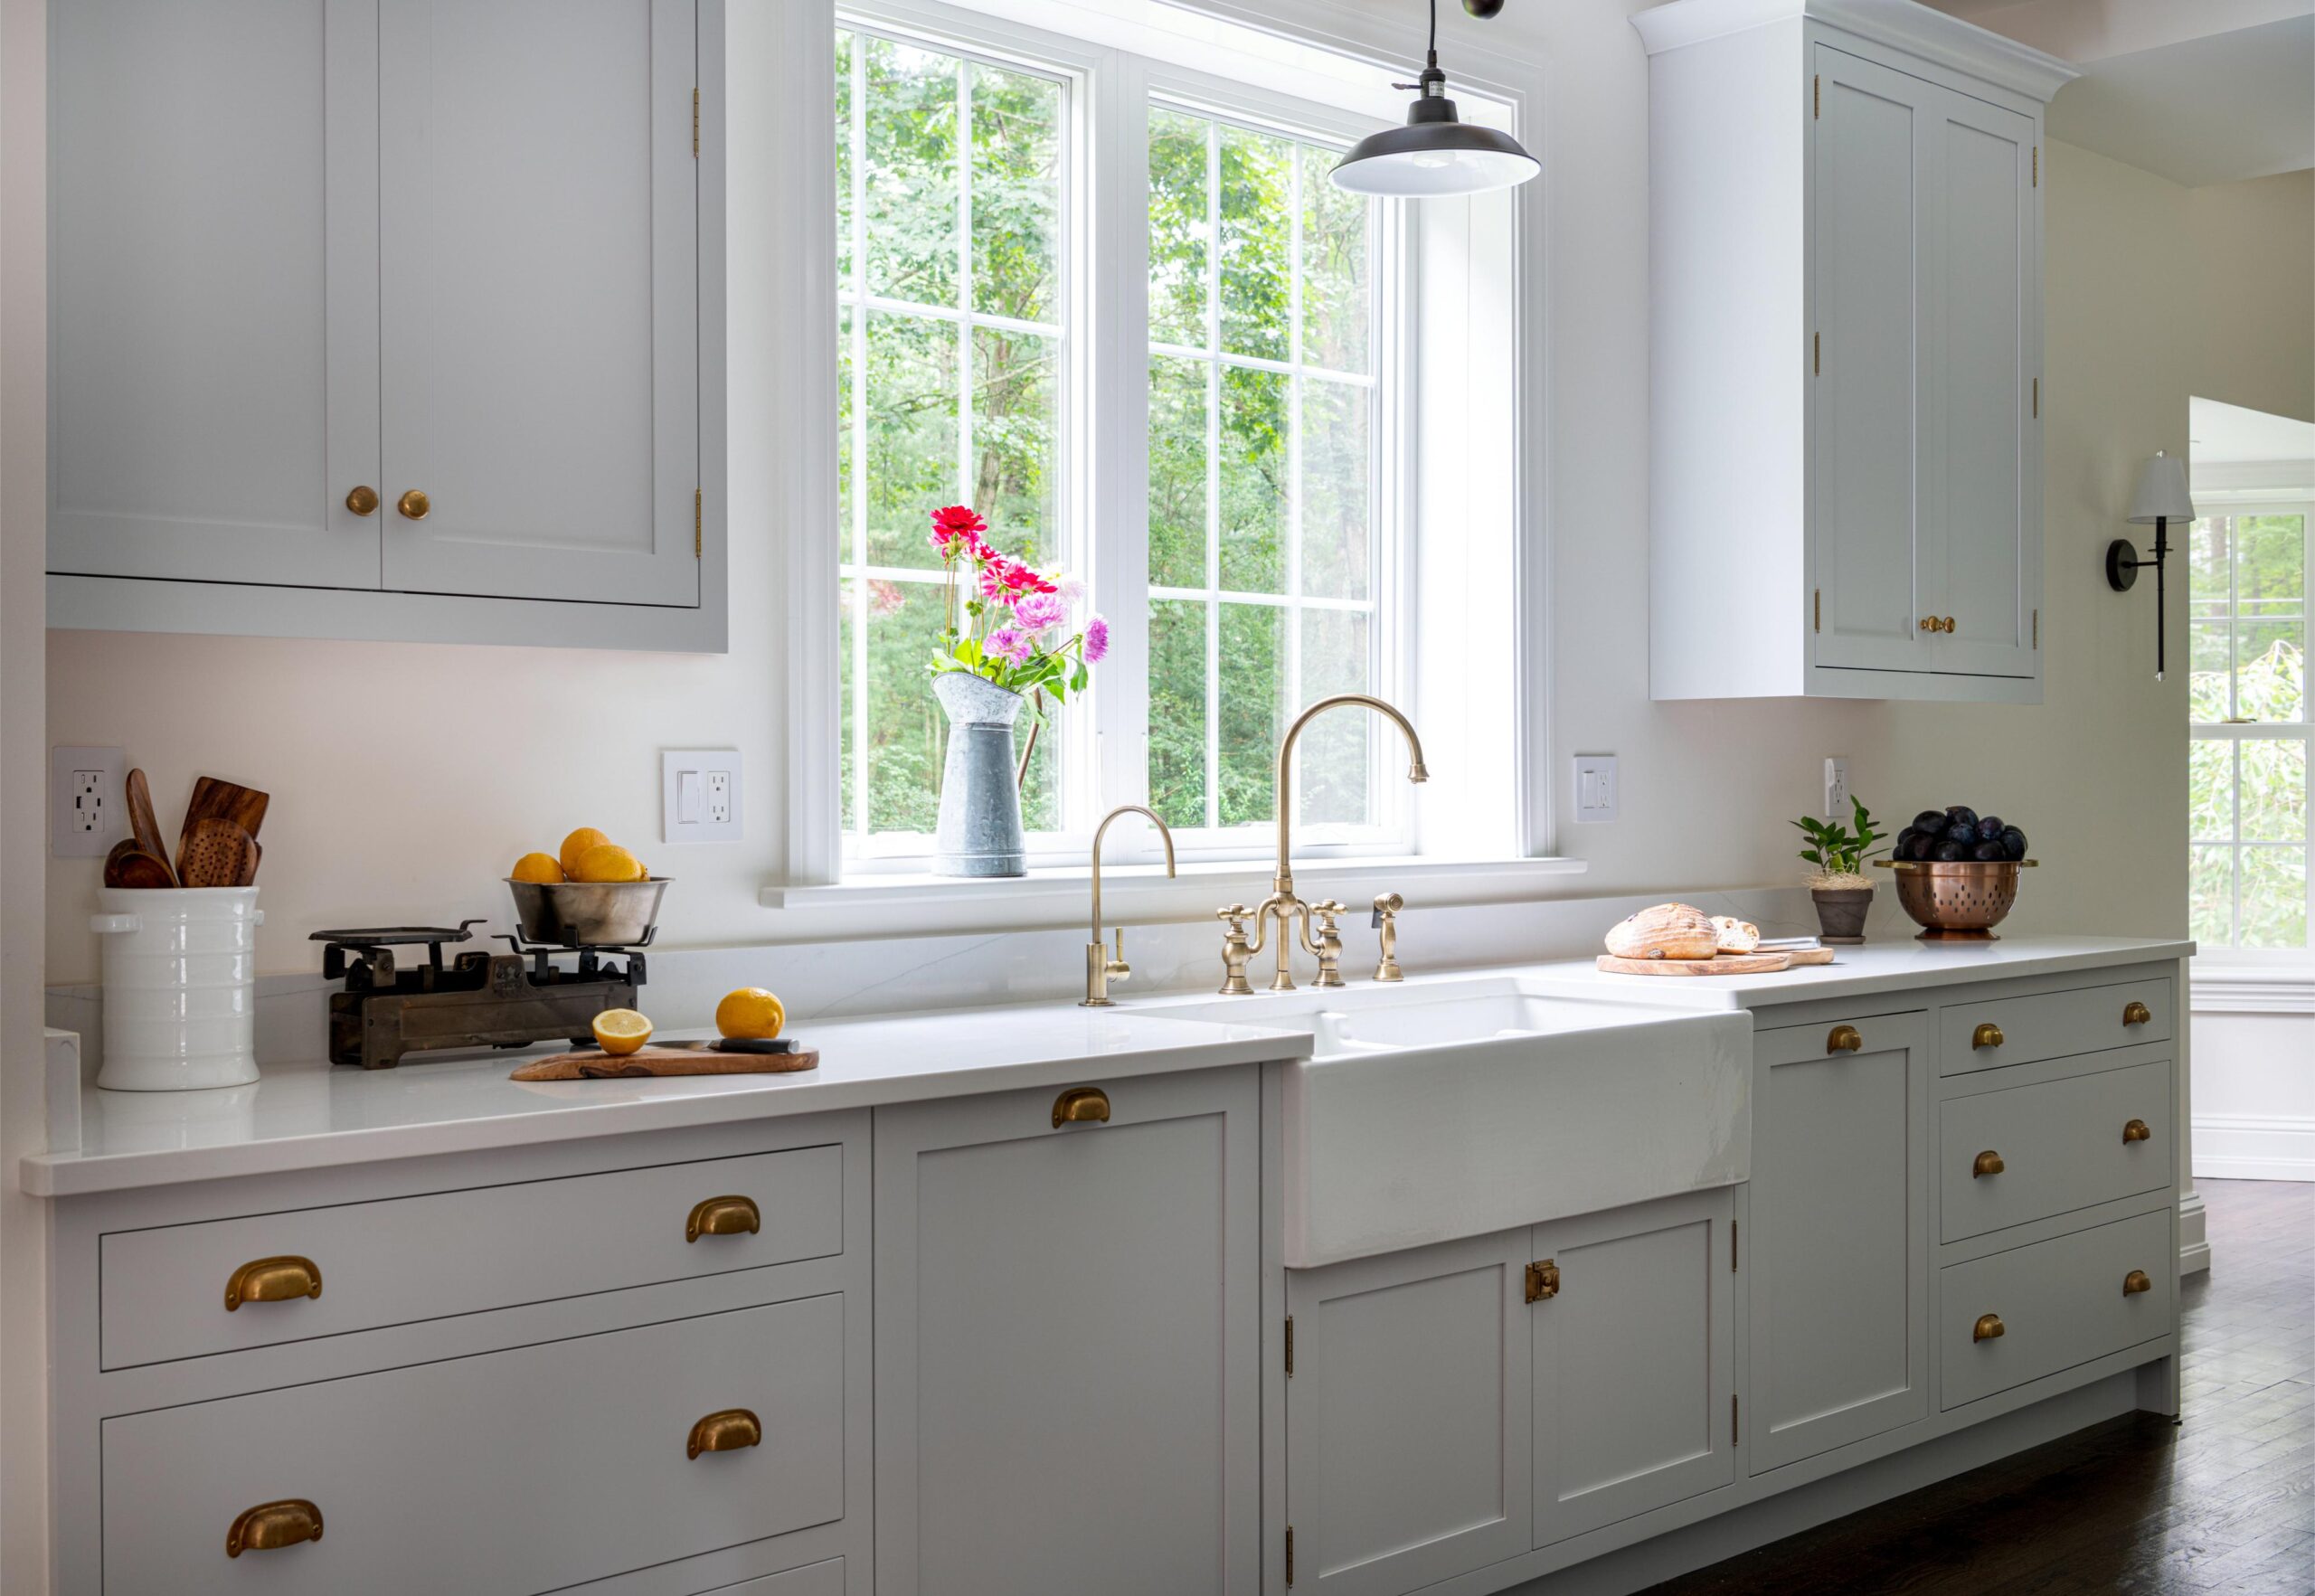 A bright kitchen with white cabinets and a white farmhouse sink. The door handles of the cabinets are gold.